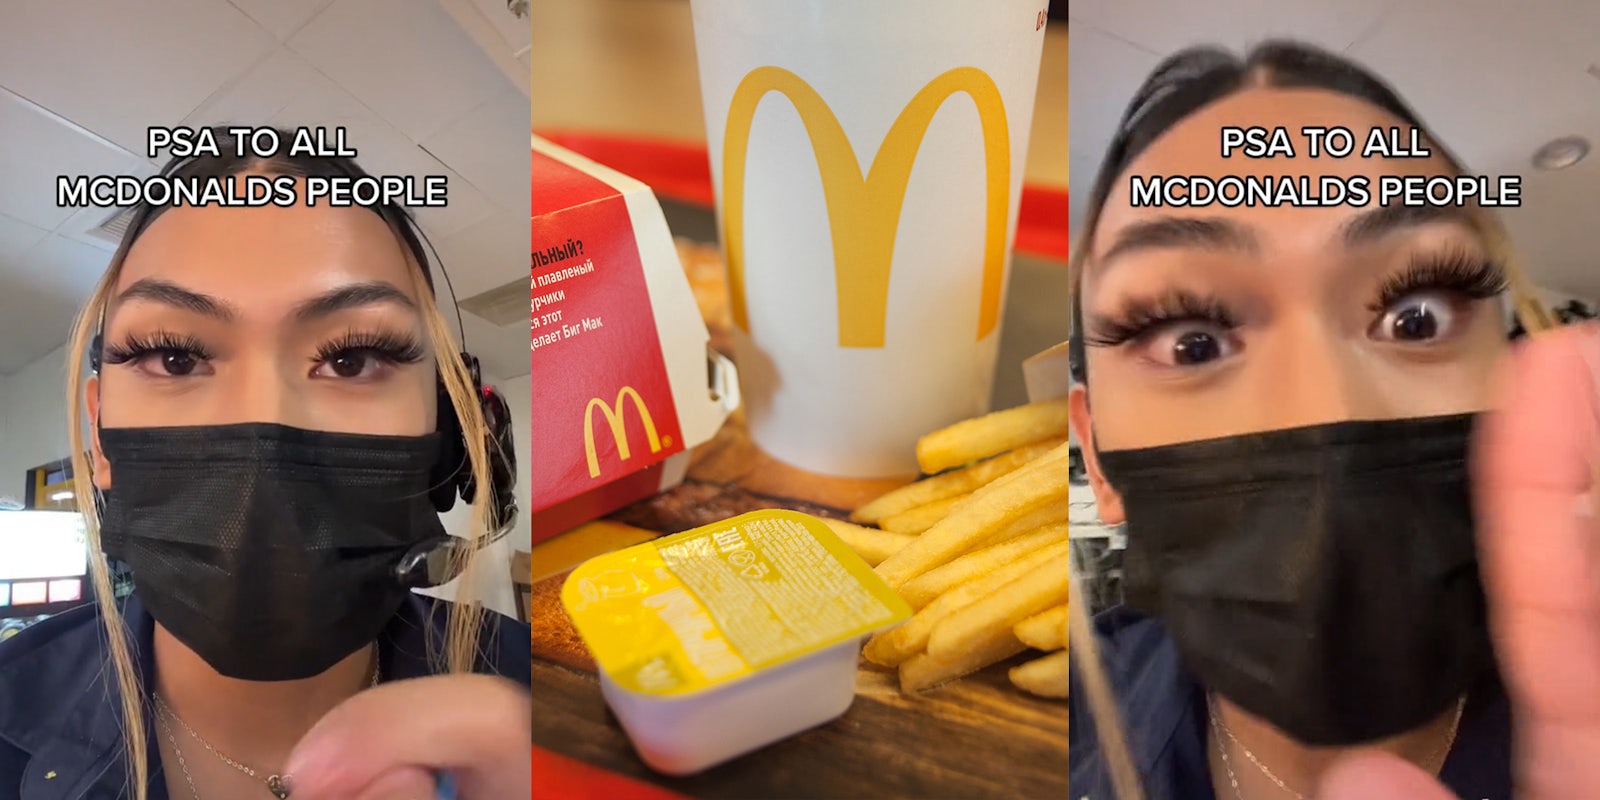 mcdonald's employee with caption 'PSA TO ALL MCDONALDS PEOPLE' (l&r) mcdonald's meal (c)